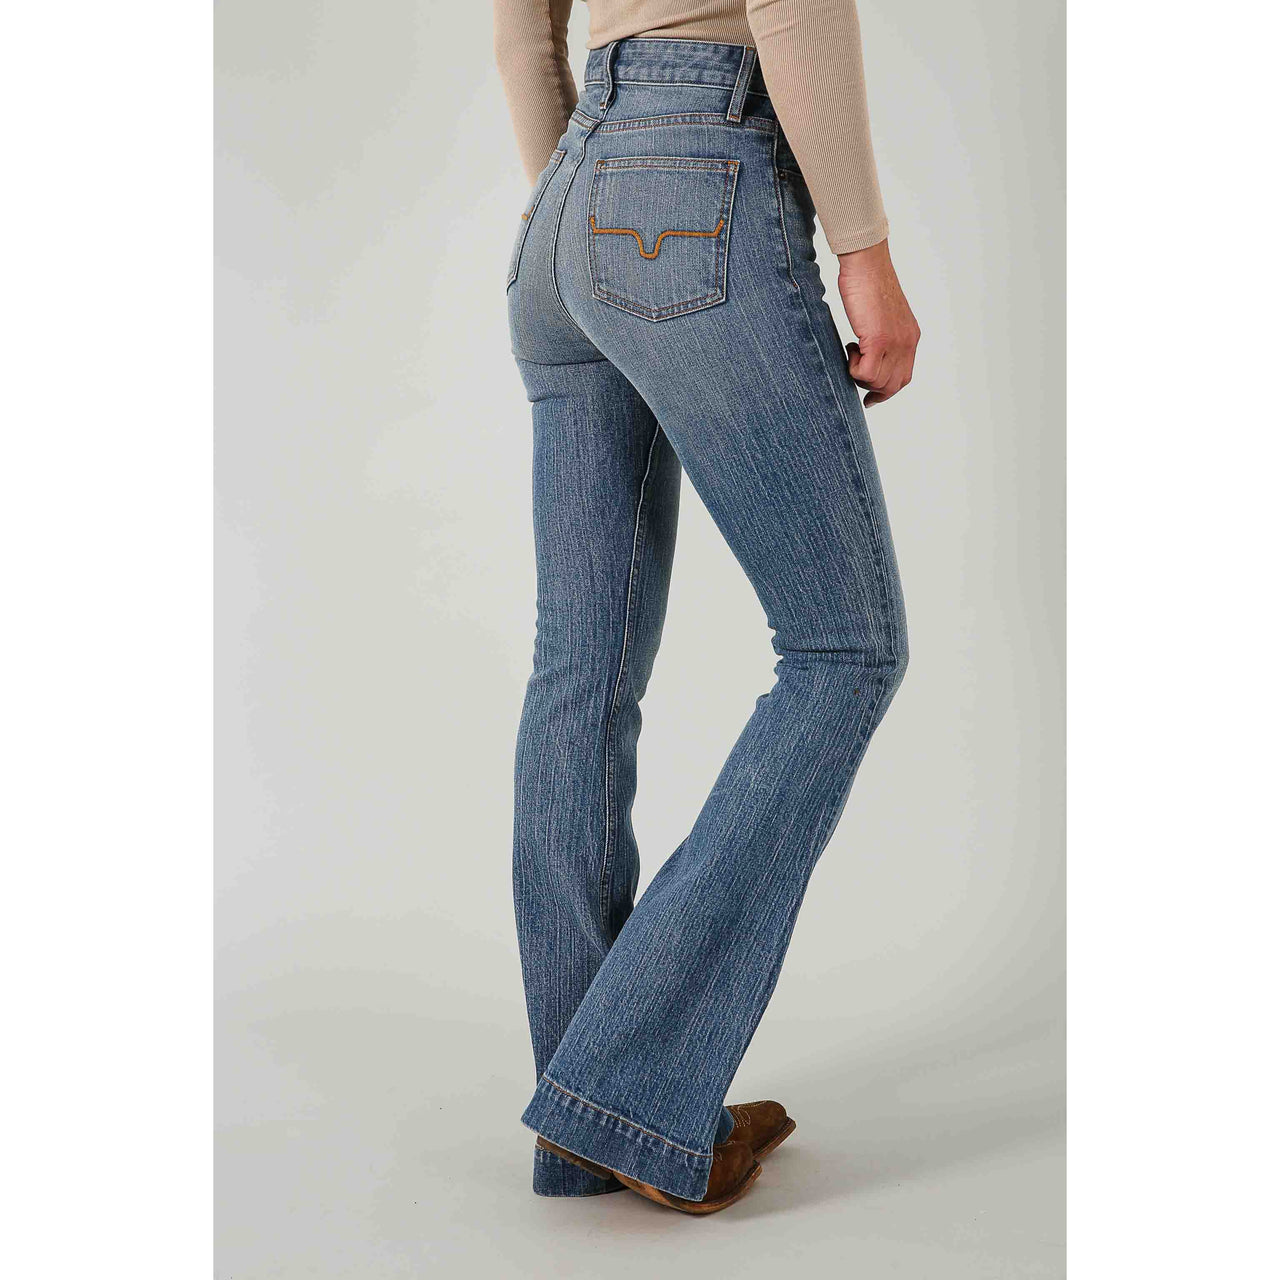 Girls' Jeans -  Canada